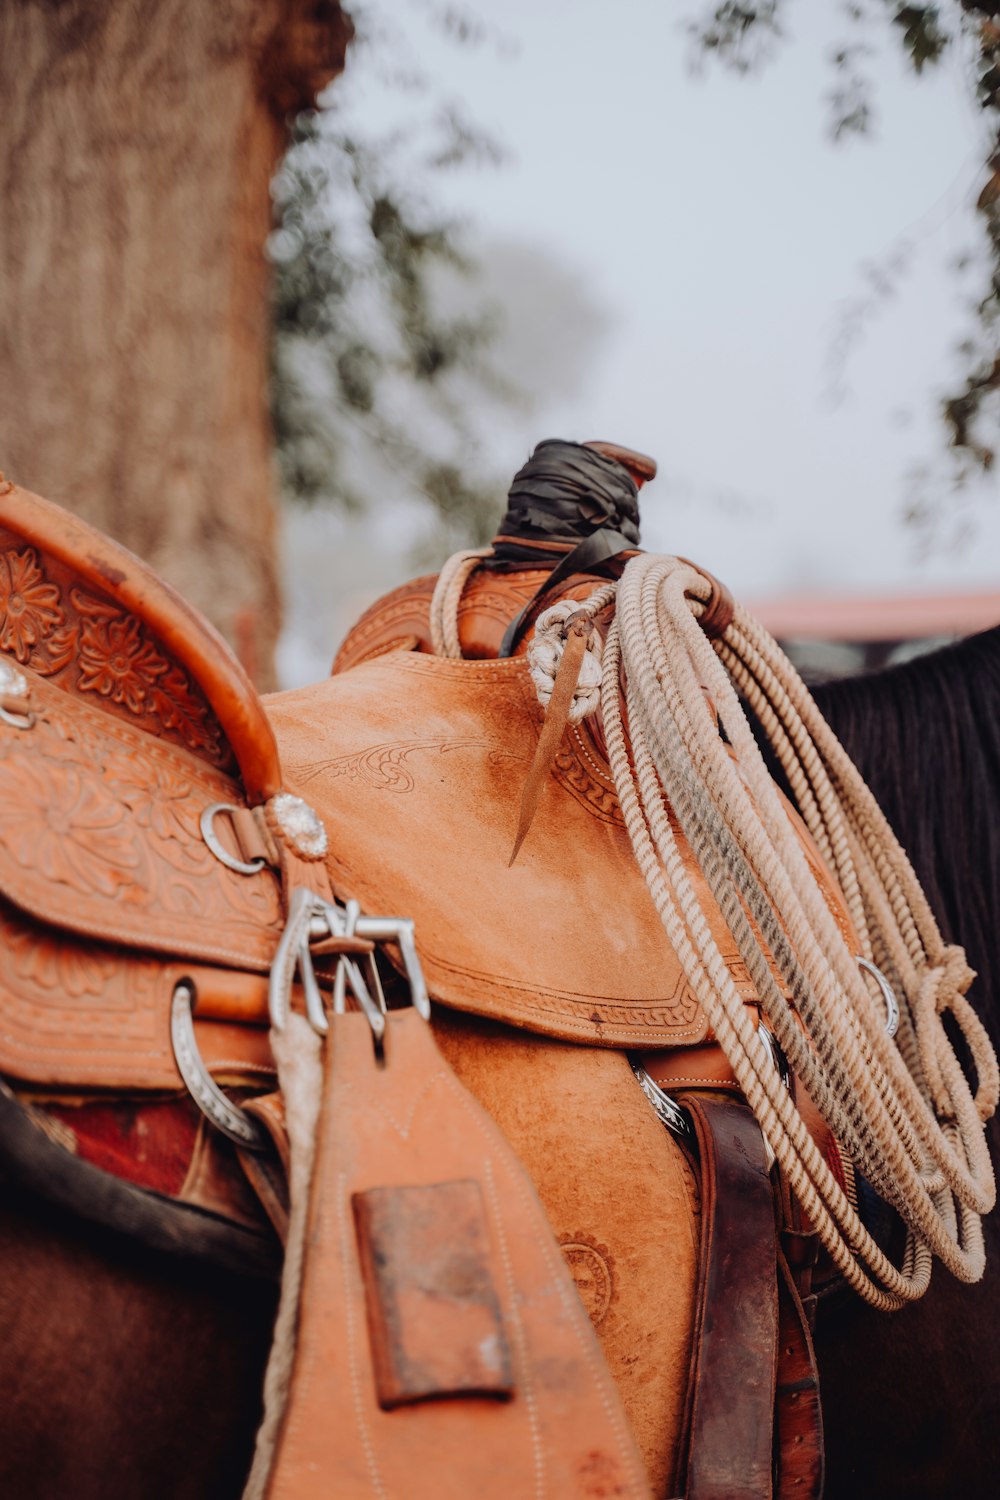 a close up of a saddle on a horse